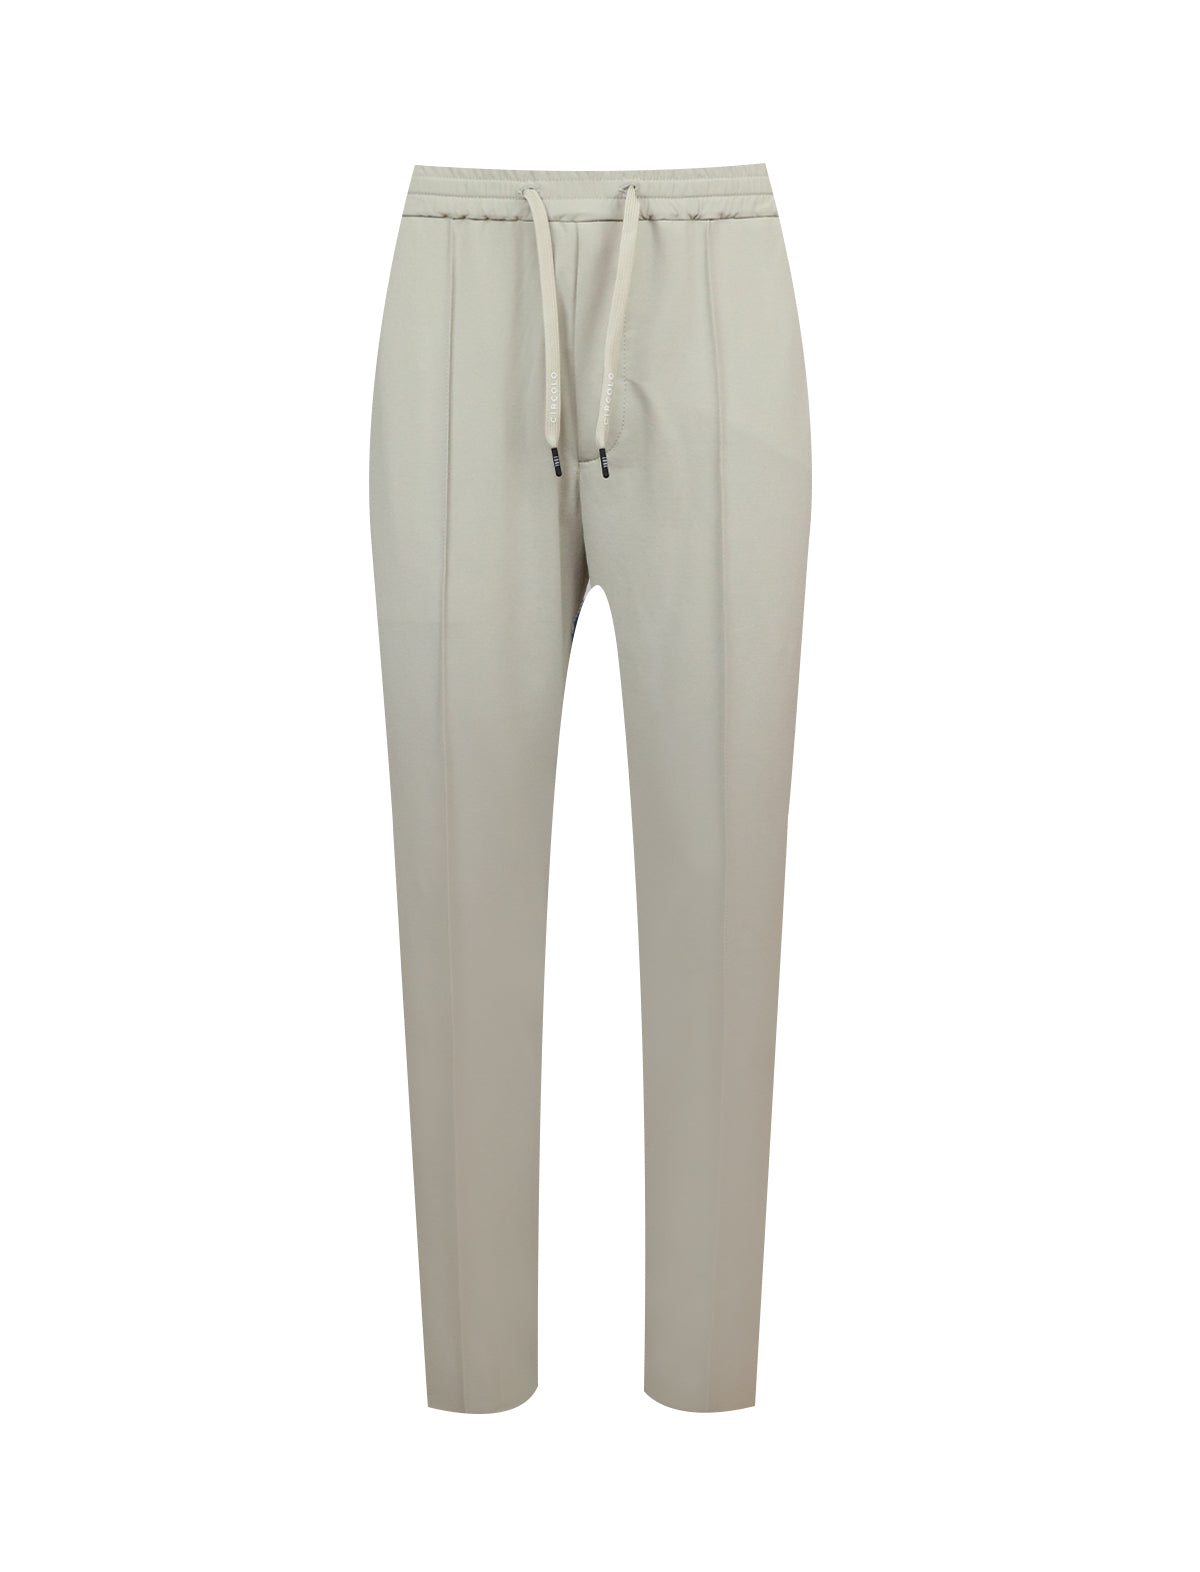 CIRCOLO 1901 Jersey Jogger Pants in Beige